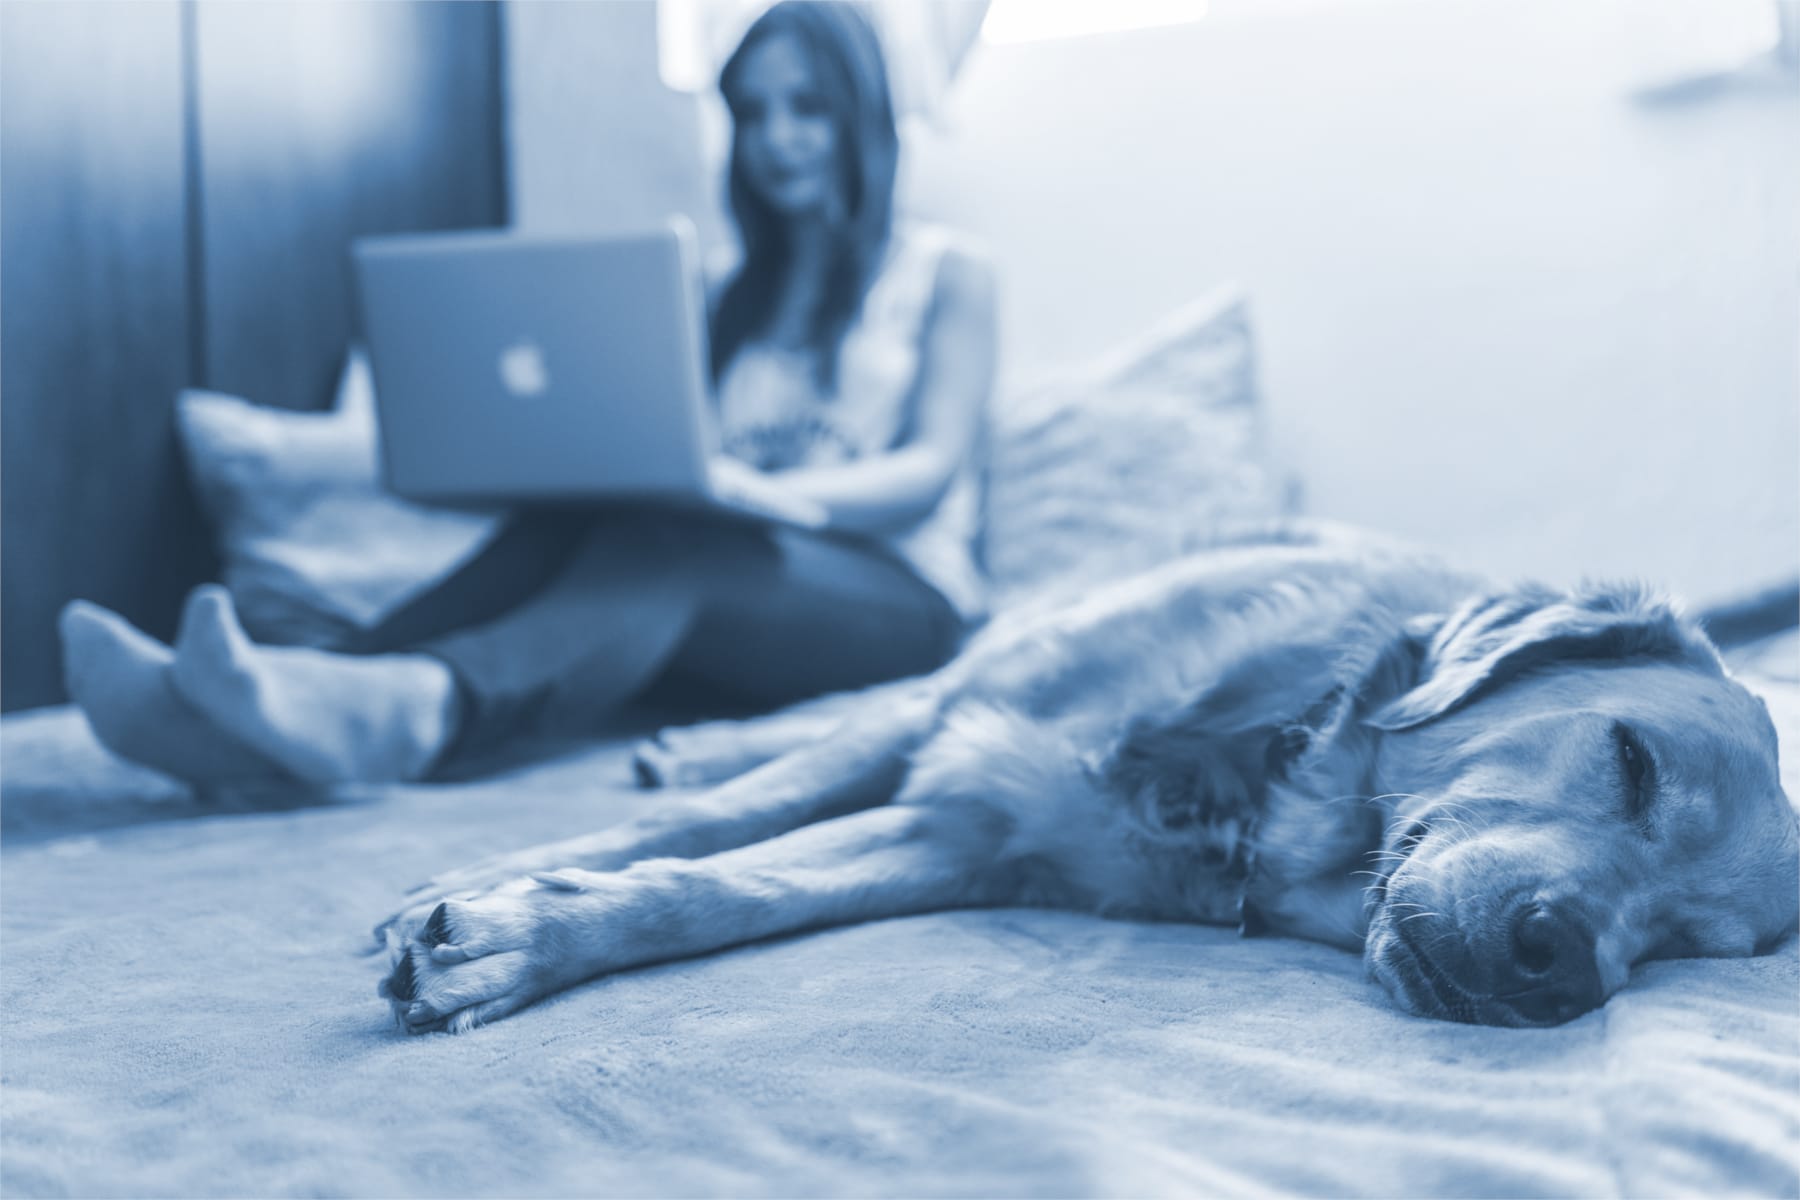 How to Get Virtual Veterinary Care When You Can't Make It To Your Regular Vet